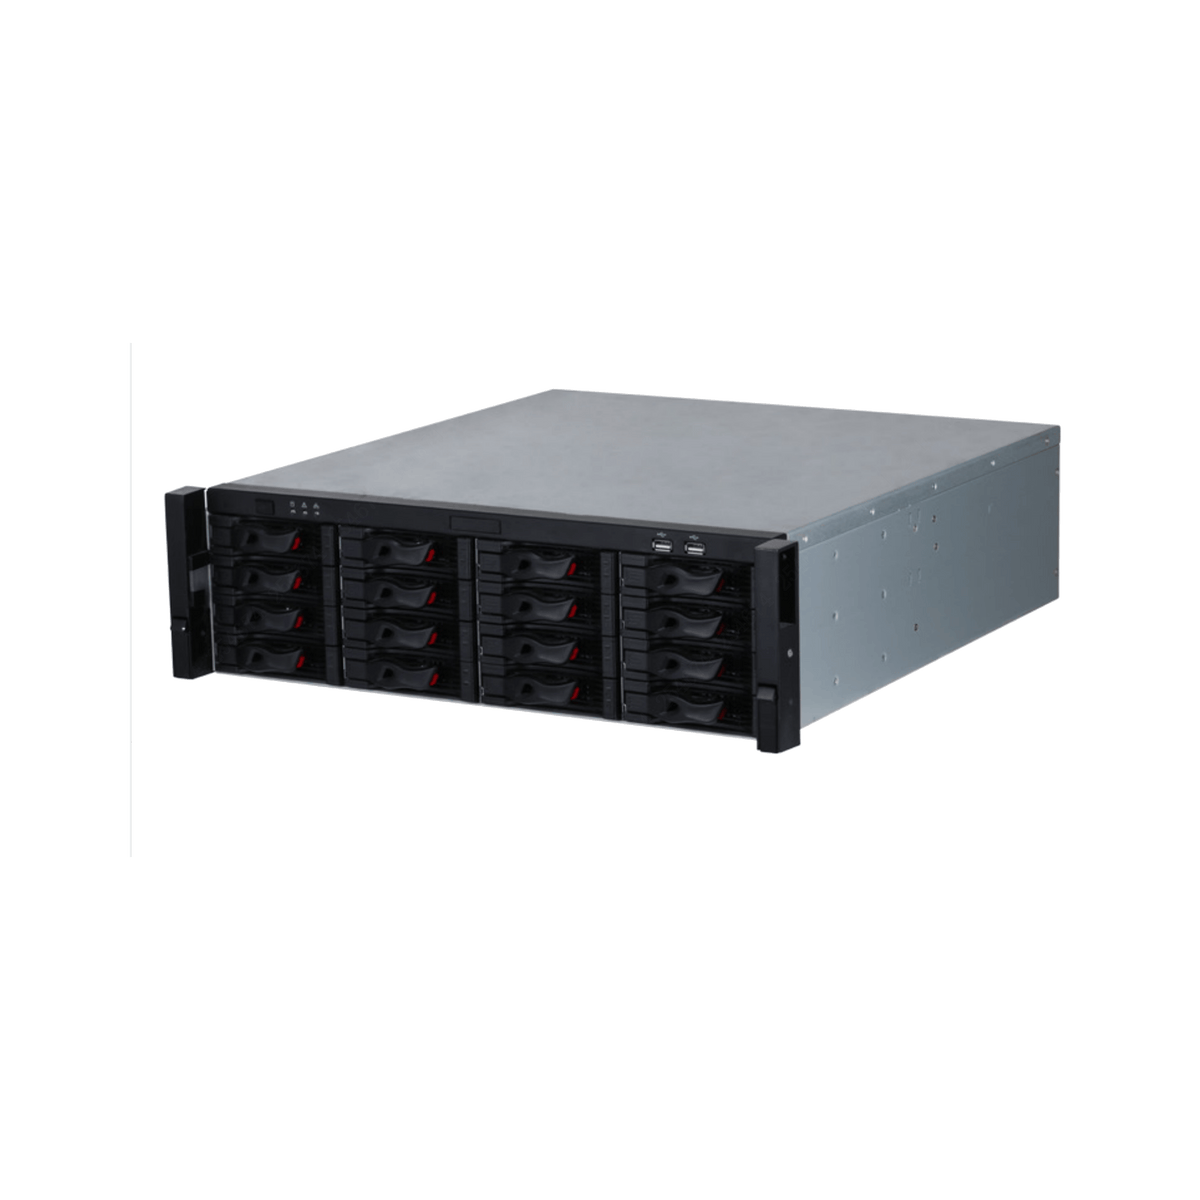 DAHUA NVR5032/5064-4KS2(only for project) DAHUA NVR5032/5064-4KS2(onlyforproject) 32/64 Channel 3U 16HDDs 4K & H.265 Pro Network Video Recorder